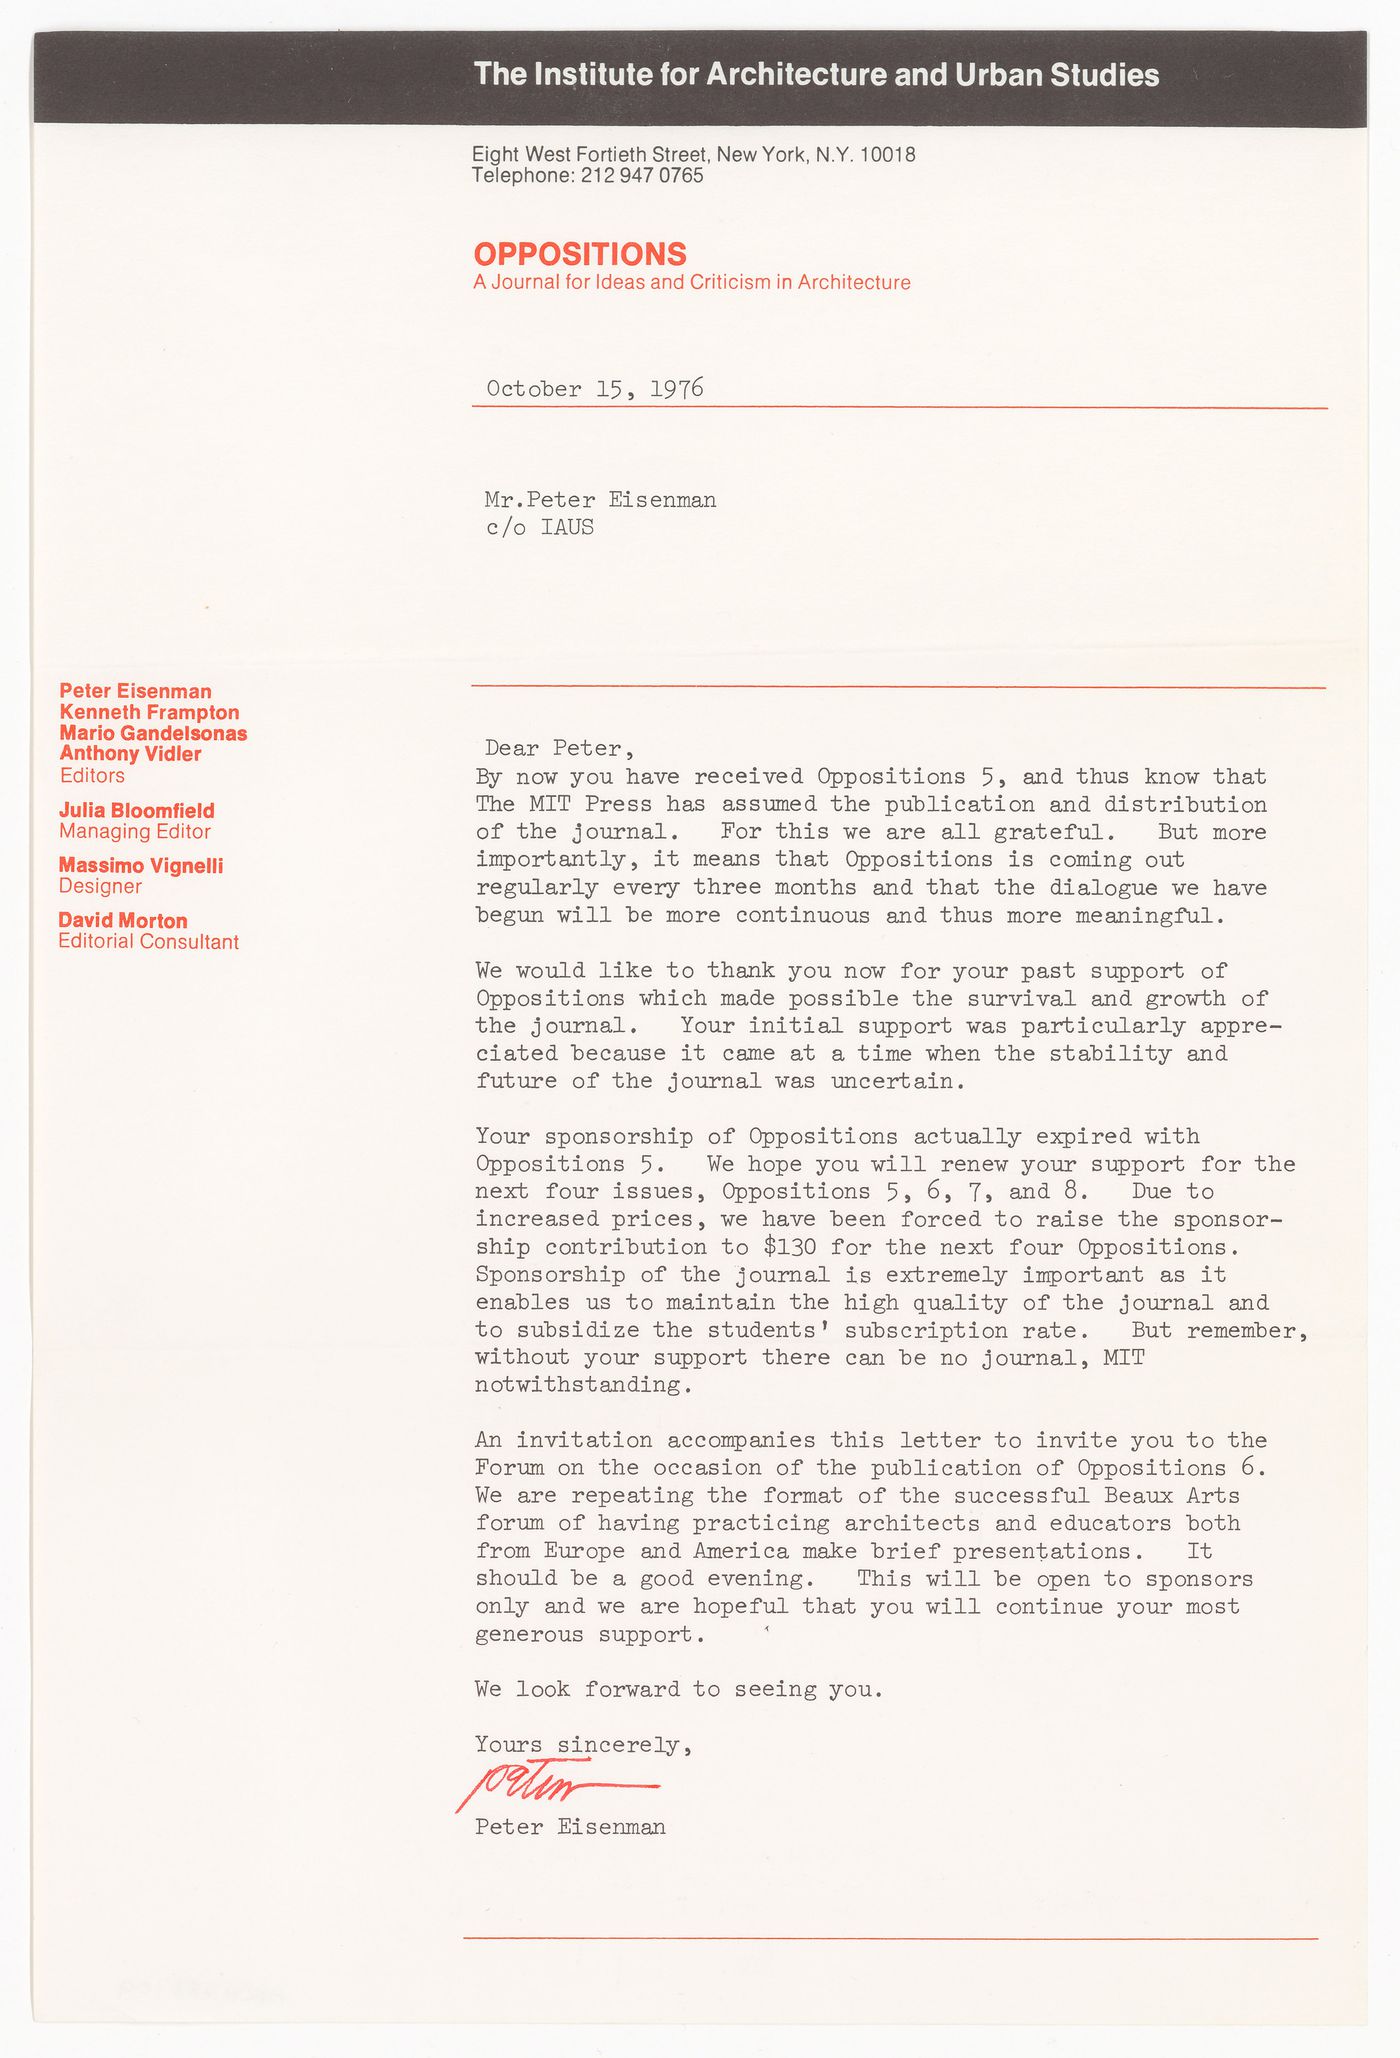 Letter to Peter Eisenman from Peter Eisenman about Oppositions